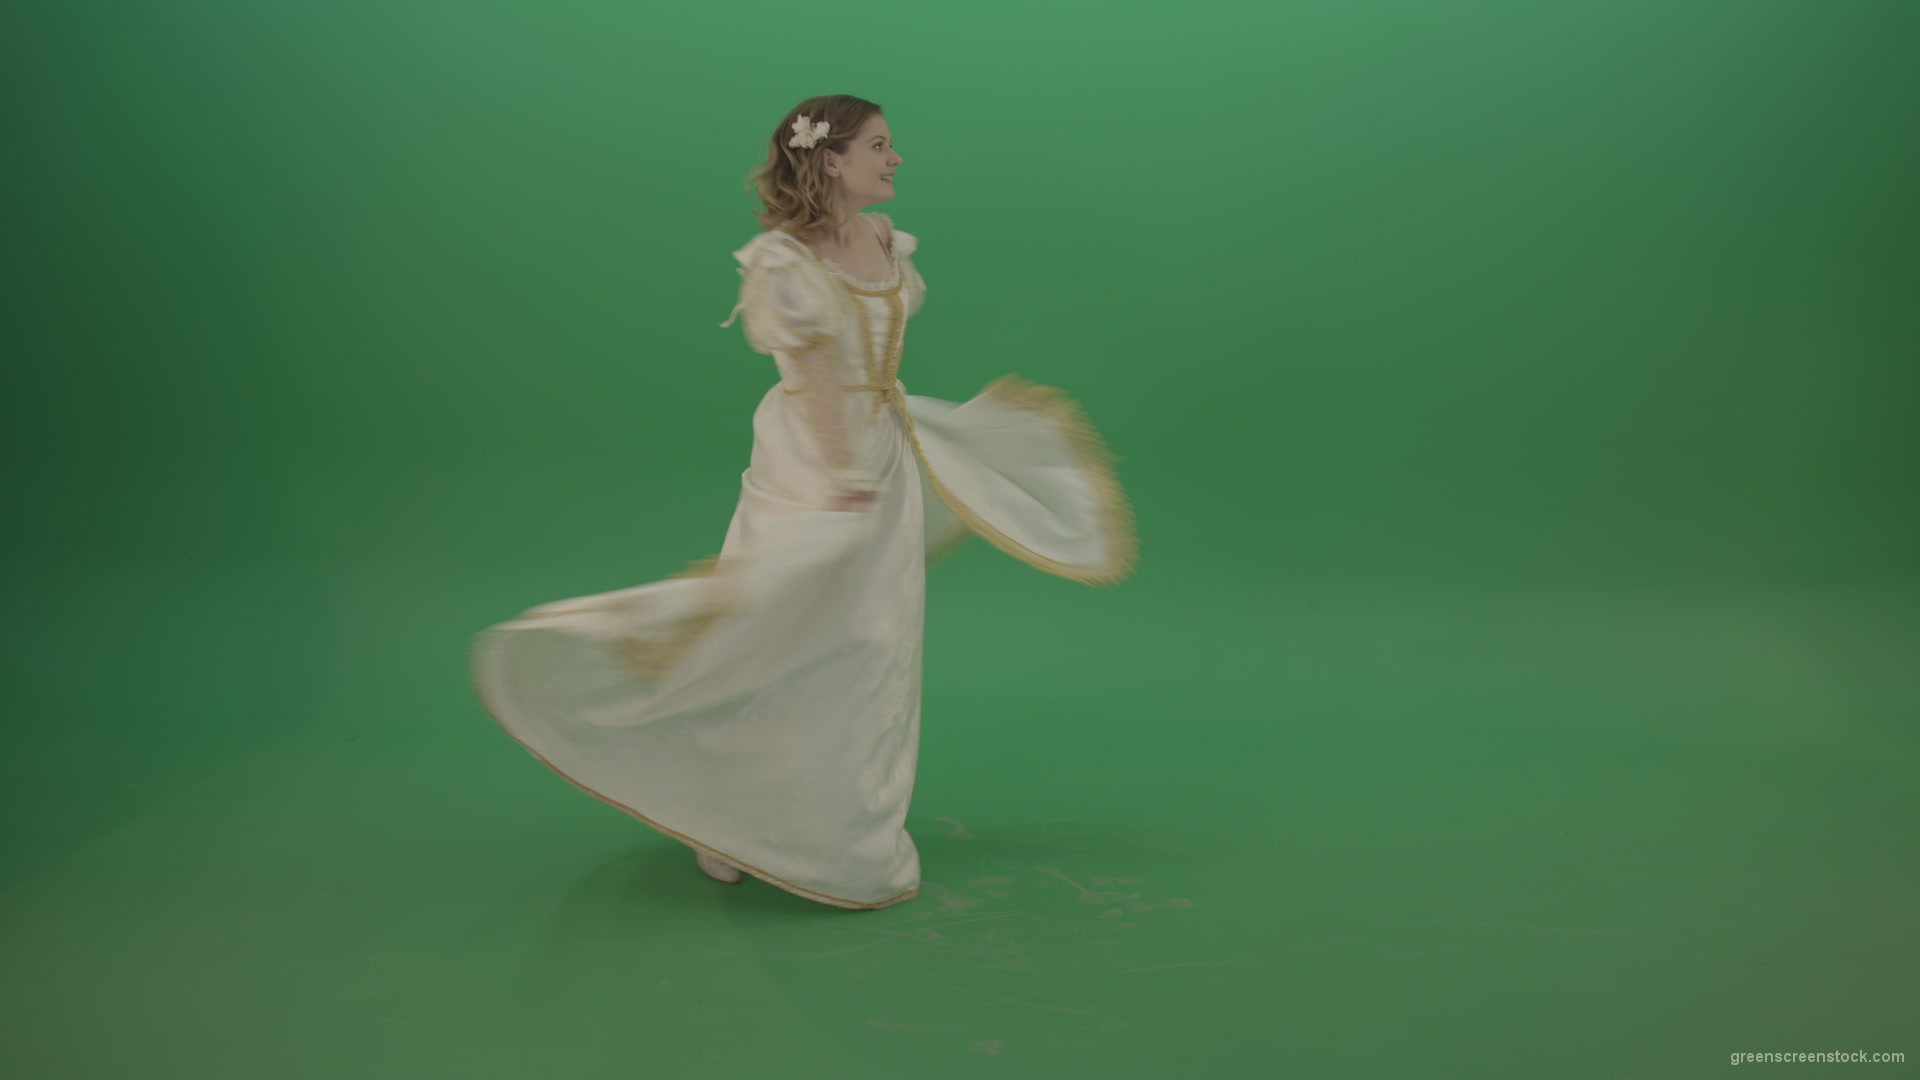 Princess-dances-twisting-around-the-circle-isolated-on-chromakey-background_008 Green Screen Stock